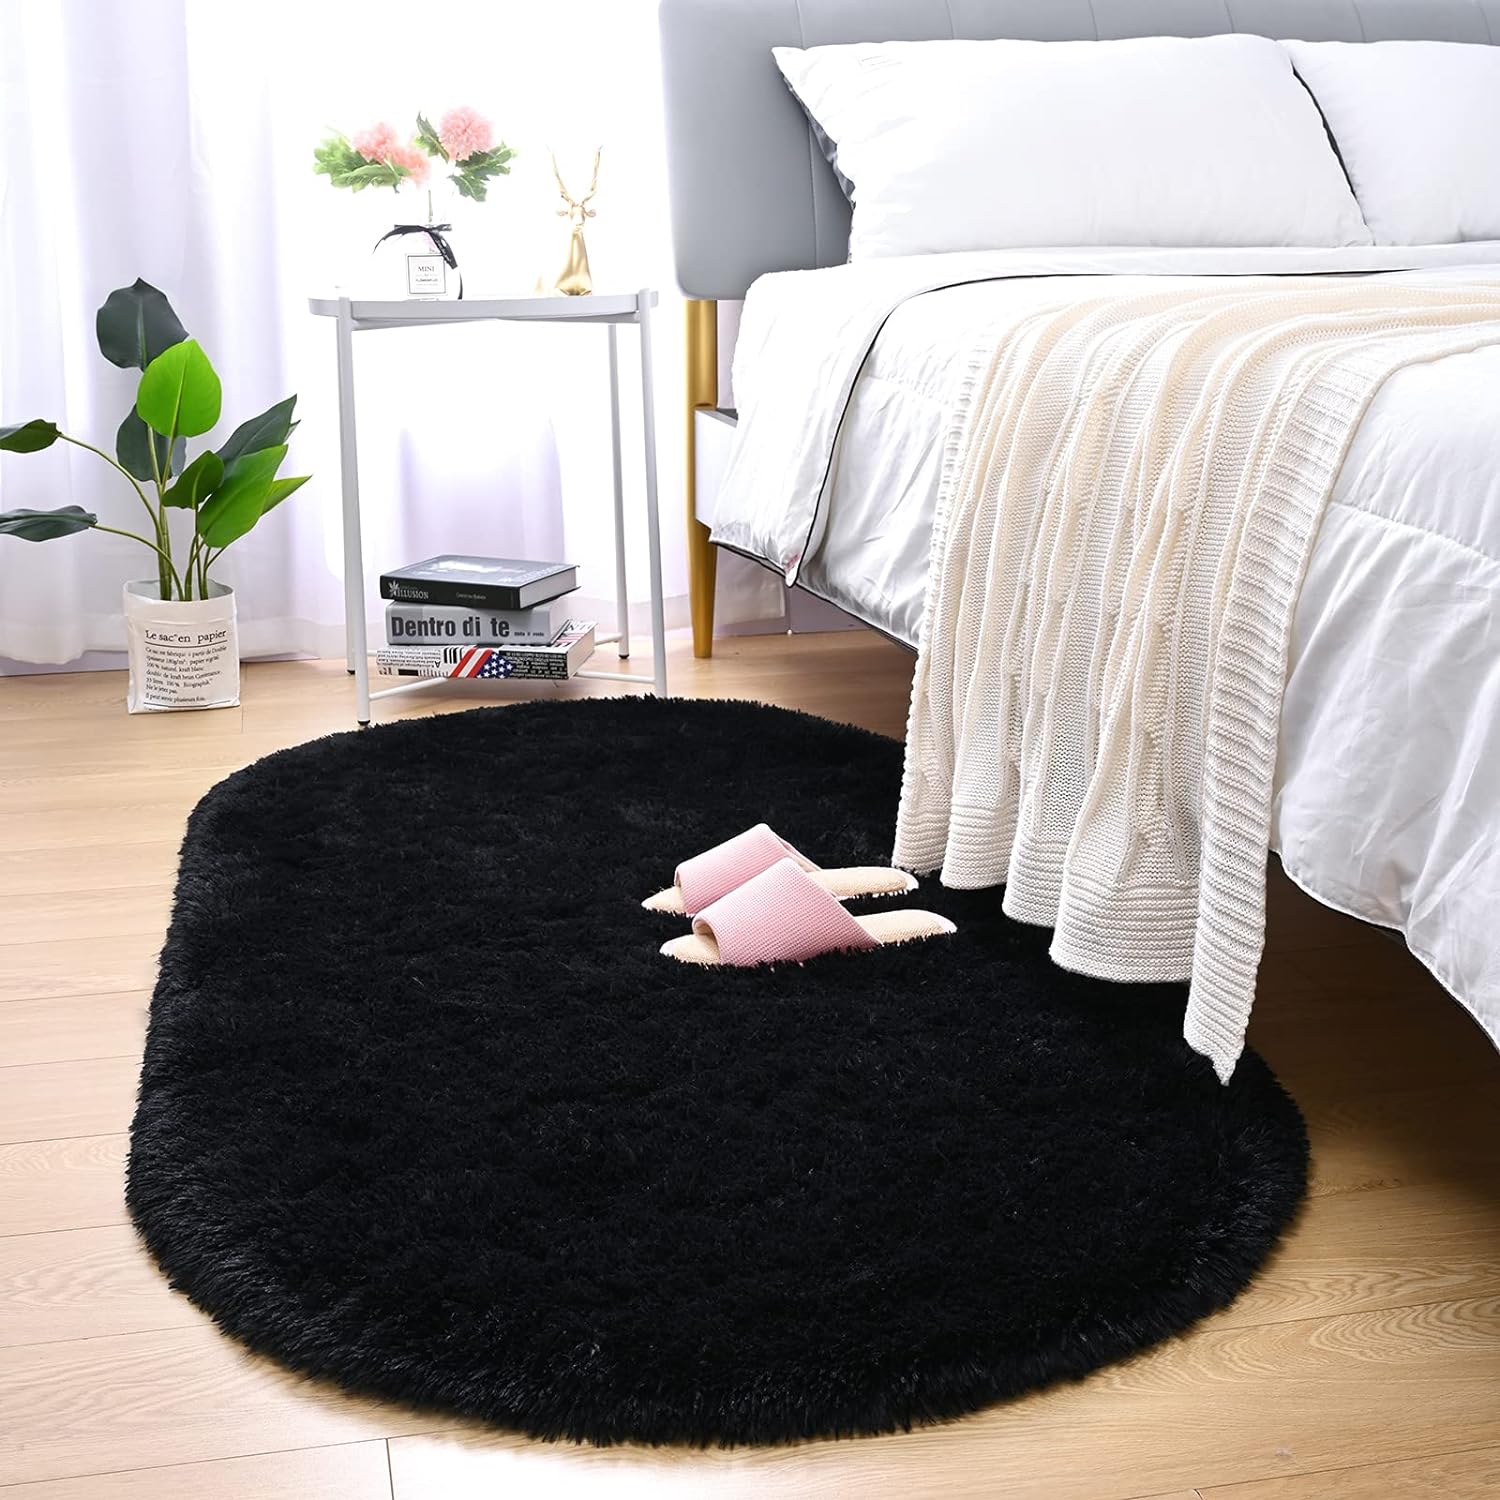 Merelax Soft Shaggy Rug for Kids Bedroom, Oval 2.6'x5.3' Black Plush Fluffy Carpets for Living Room, Furry Carpet for Teen Girls Room, Anti-Skid Fuzzy Comfy Rug for Nursery Decor Cute Baby Play Mat